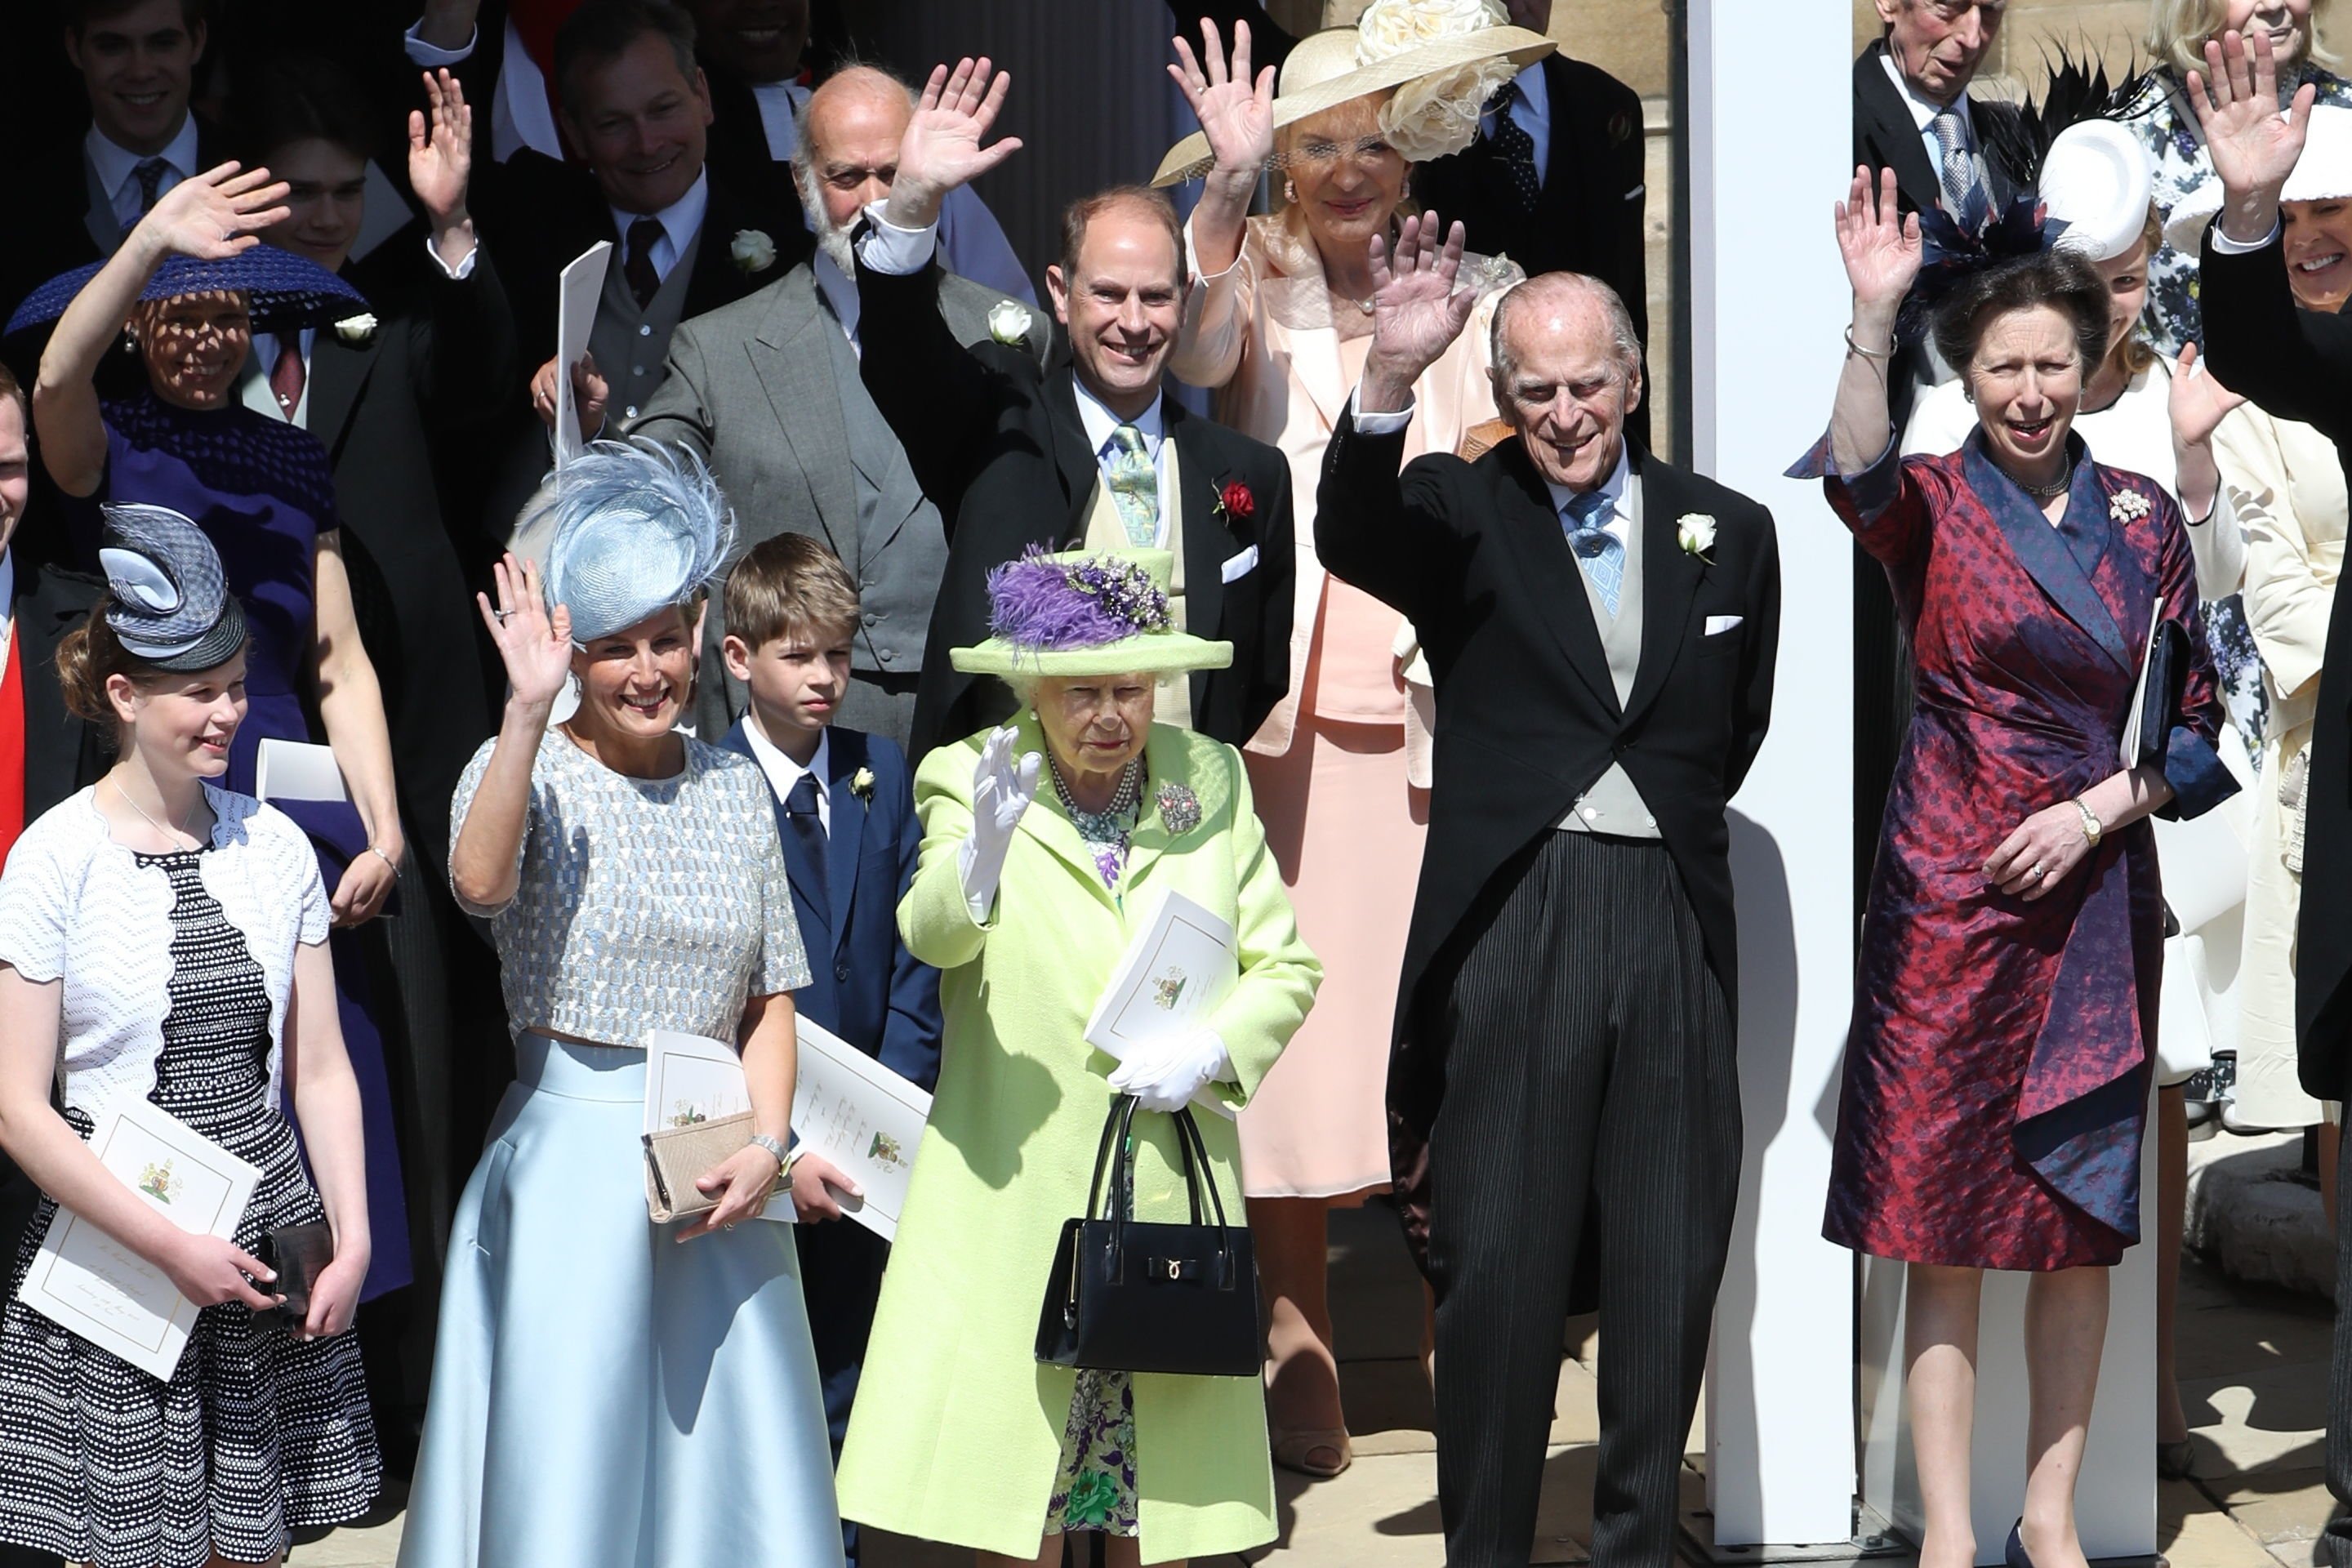 (L-R) Lady Louise Windsor, Sophie, Countess of Wessex, James, Viscount Severn, Queen Elizabeth II, Prince Michael of Kent, Prince Edward, Prince Philip, Princess Anne, Princess Royal wave after the wedding of Prince Harry and Meghan Markle at St George's Chapel in Windsor Castle on May 19, 2018 in Windsor, England | Source: Getty Images